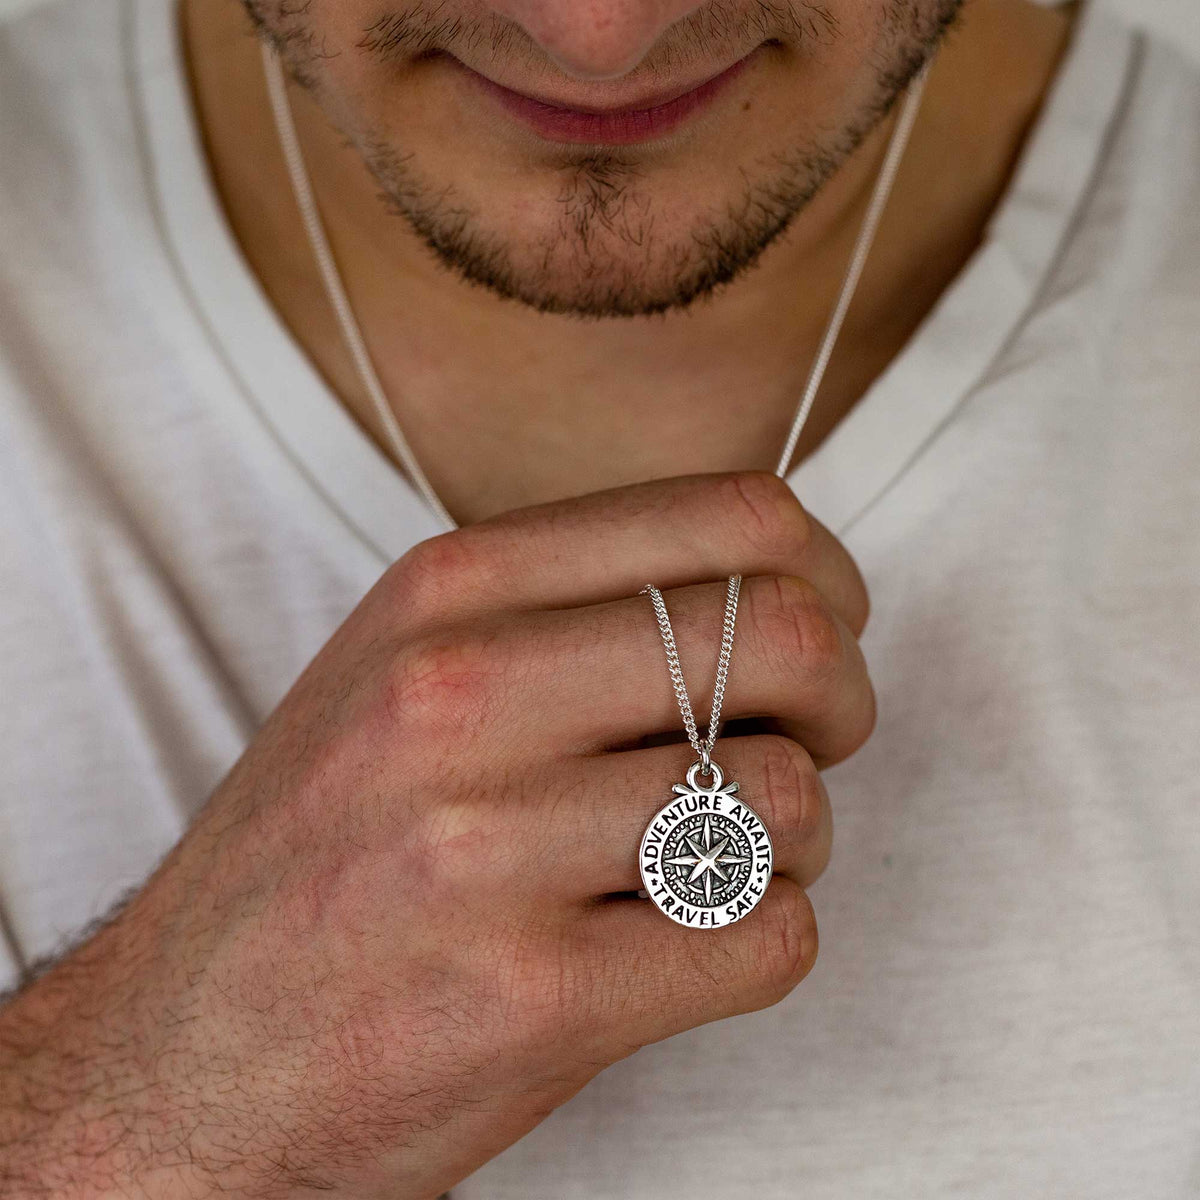 large compass mens necklace travel safe adventure awaits bespoke engraved recycled silver